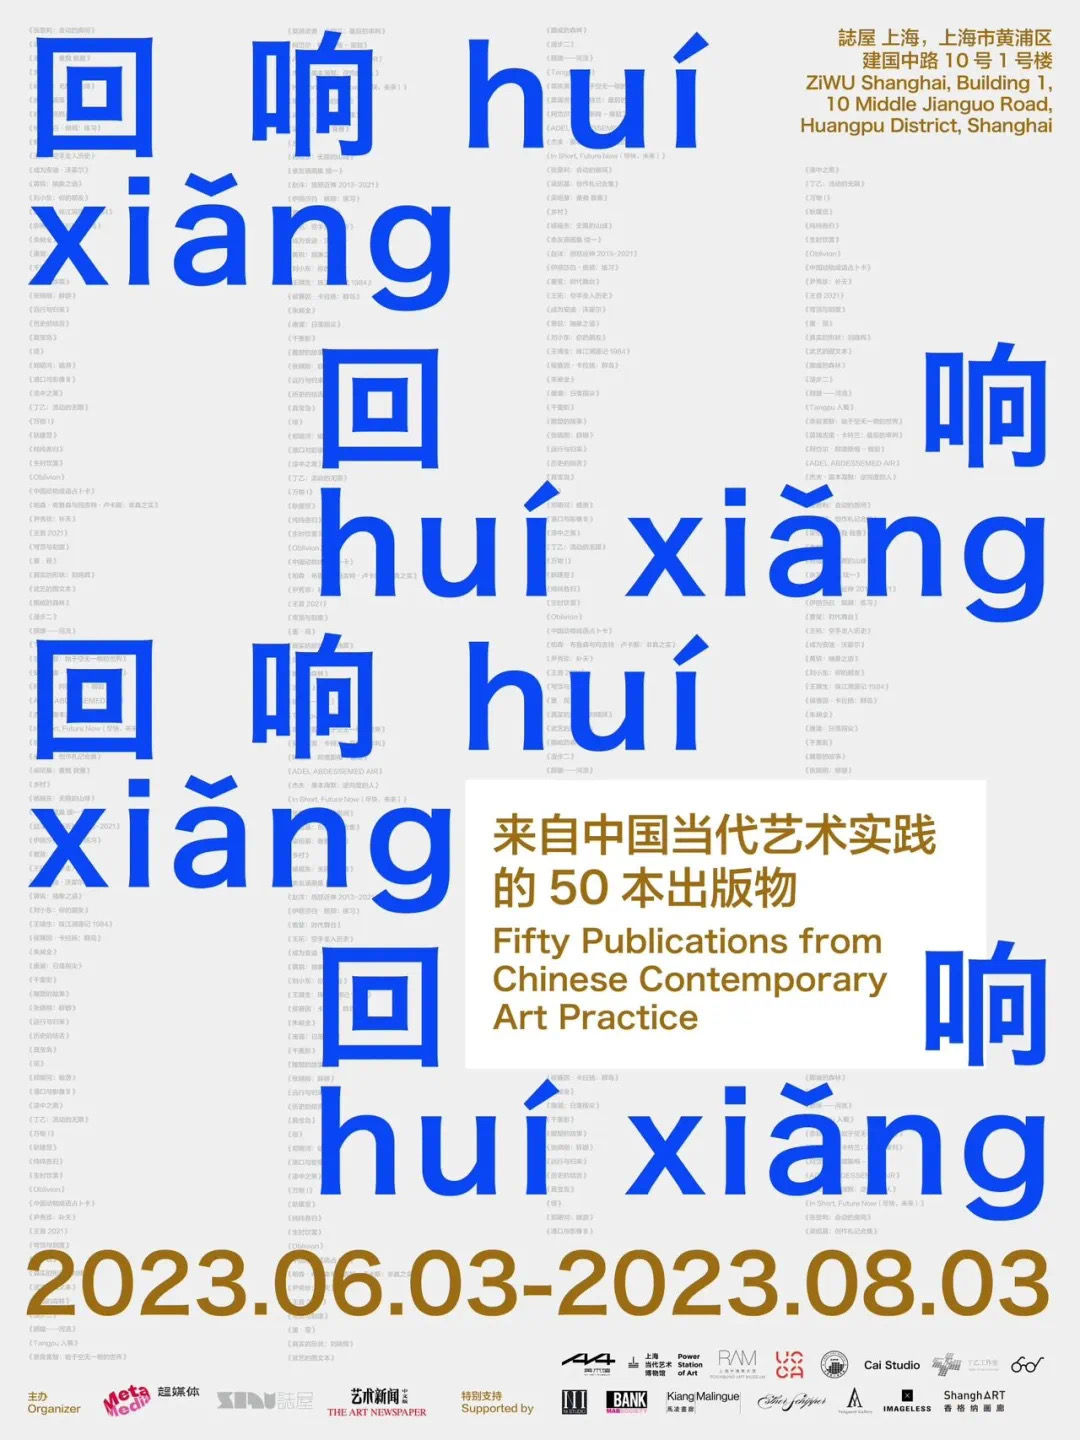 hui xiang: Fifty Publications from Chinese Contemporary Art Practice during 2020-2023 (exhibition)